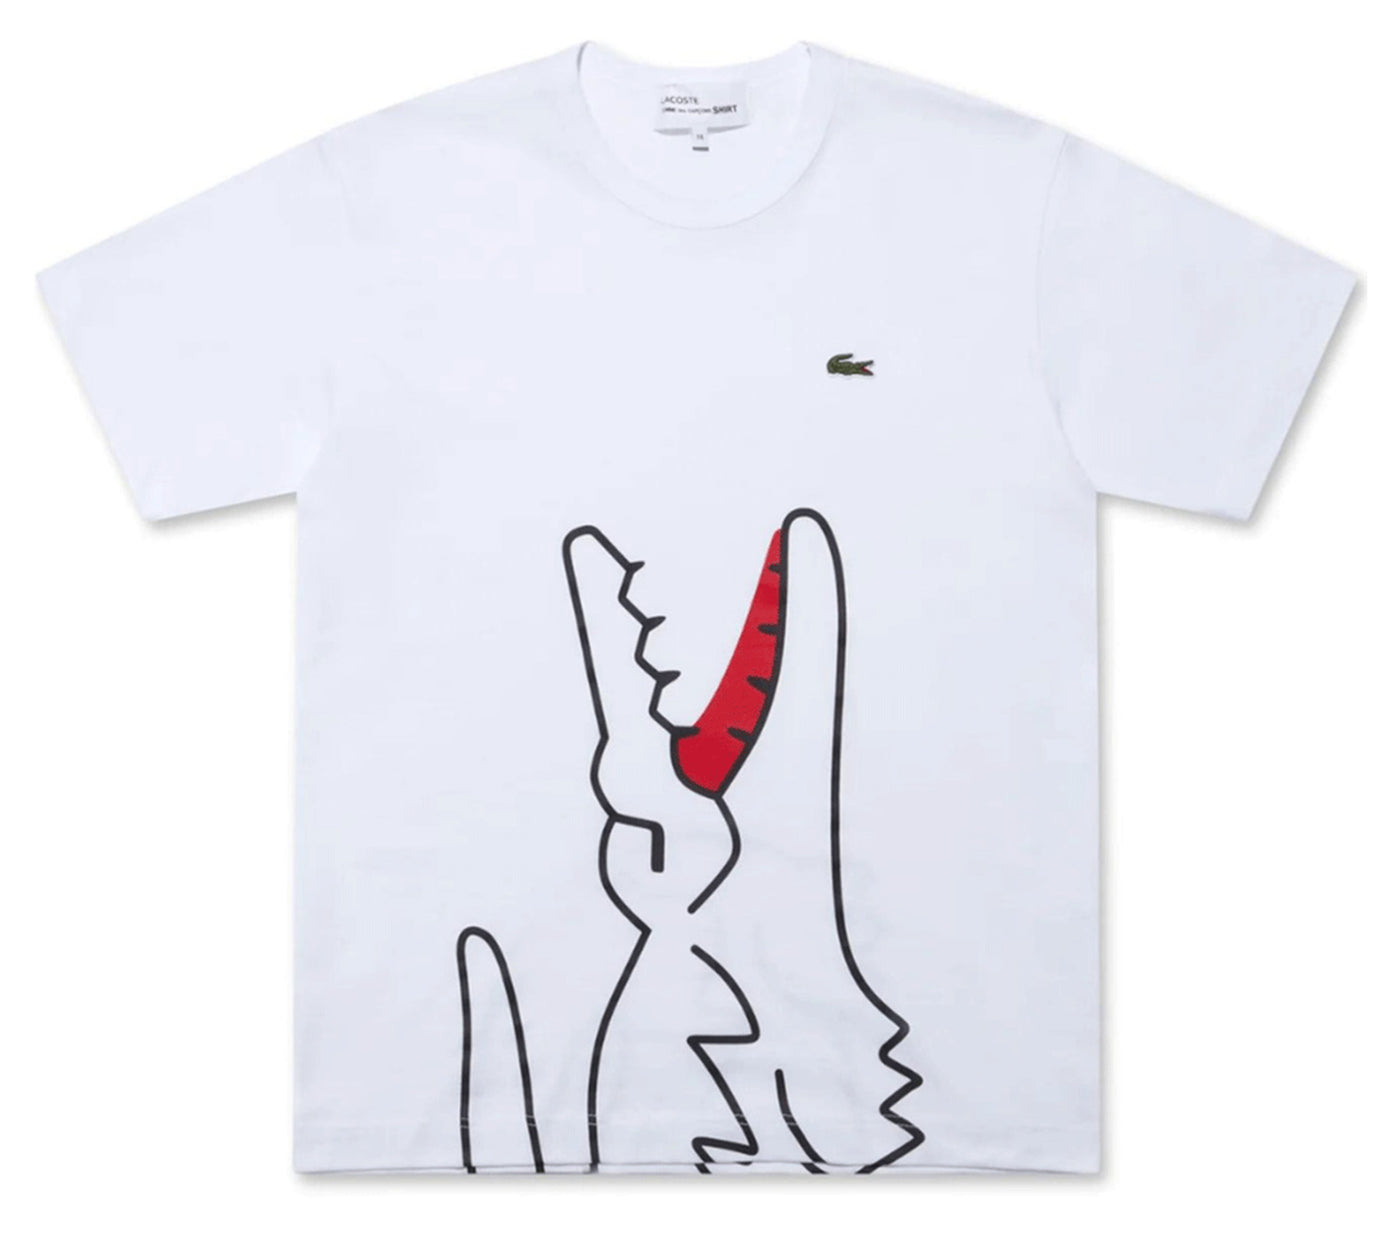 COMME-des-GARCONS-SHIRT-Lacoste-X-CDG-SHIRT-Pattern-Tee-White-1